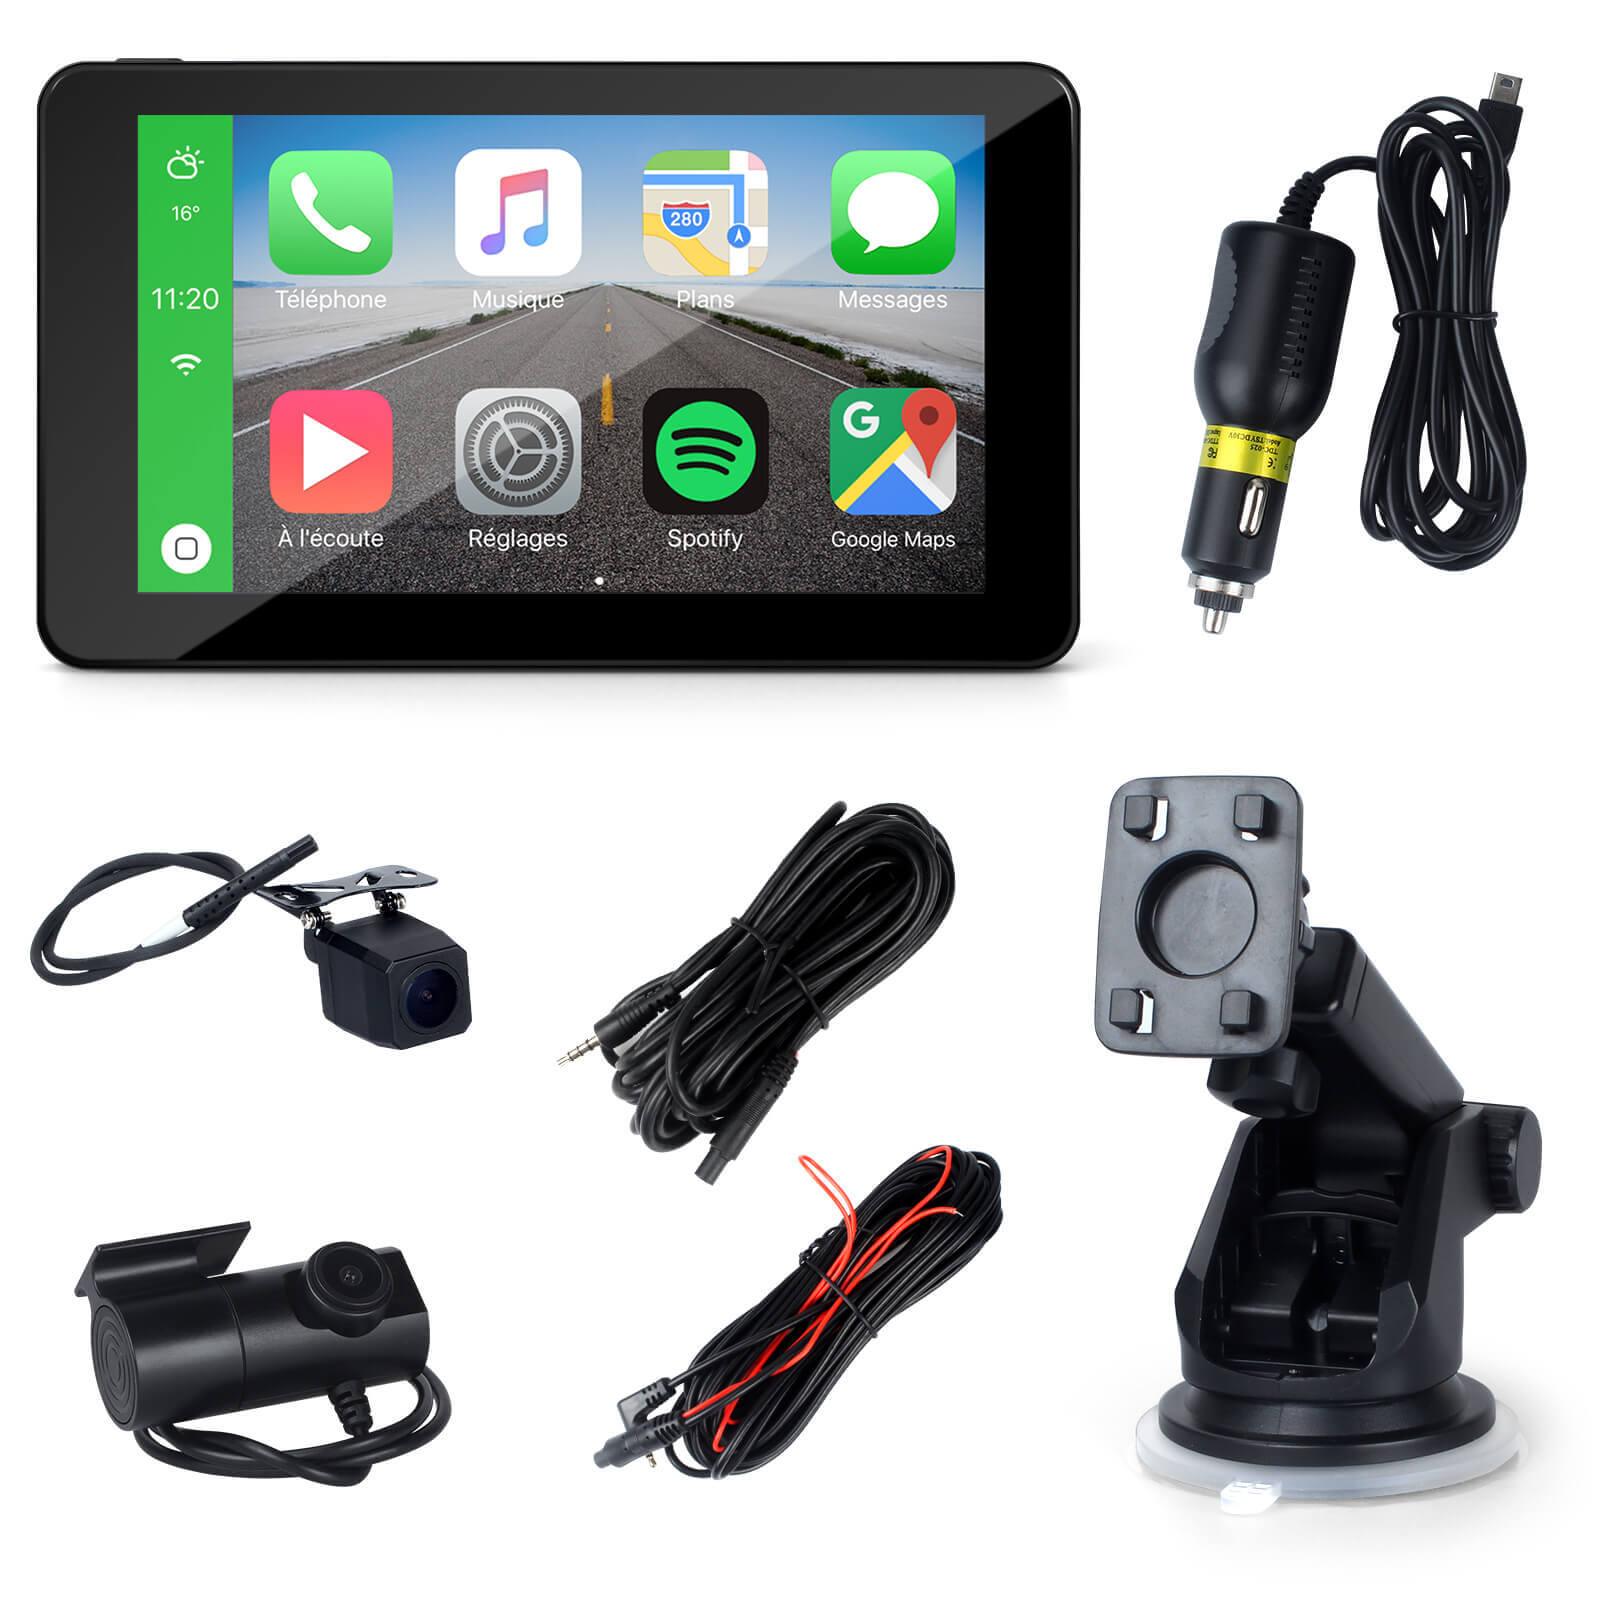 Cost-effective and Most worthwhile XGODY Portable Car and Driver Car Stereo with Wireless Carplay & Android Auto, Online GPS Navigation and Camera - XGODY 